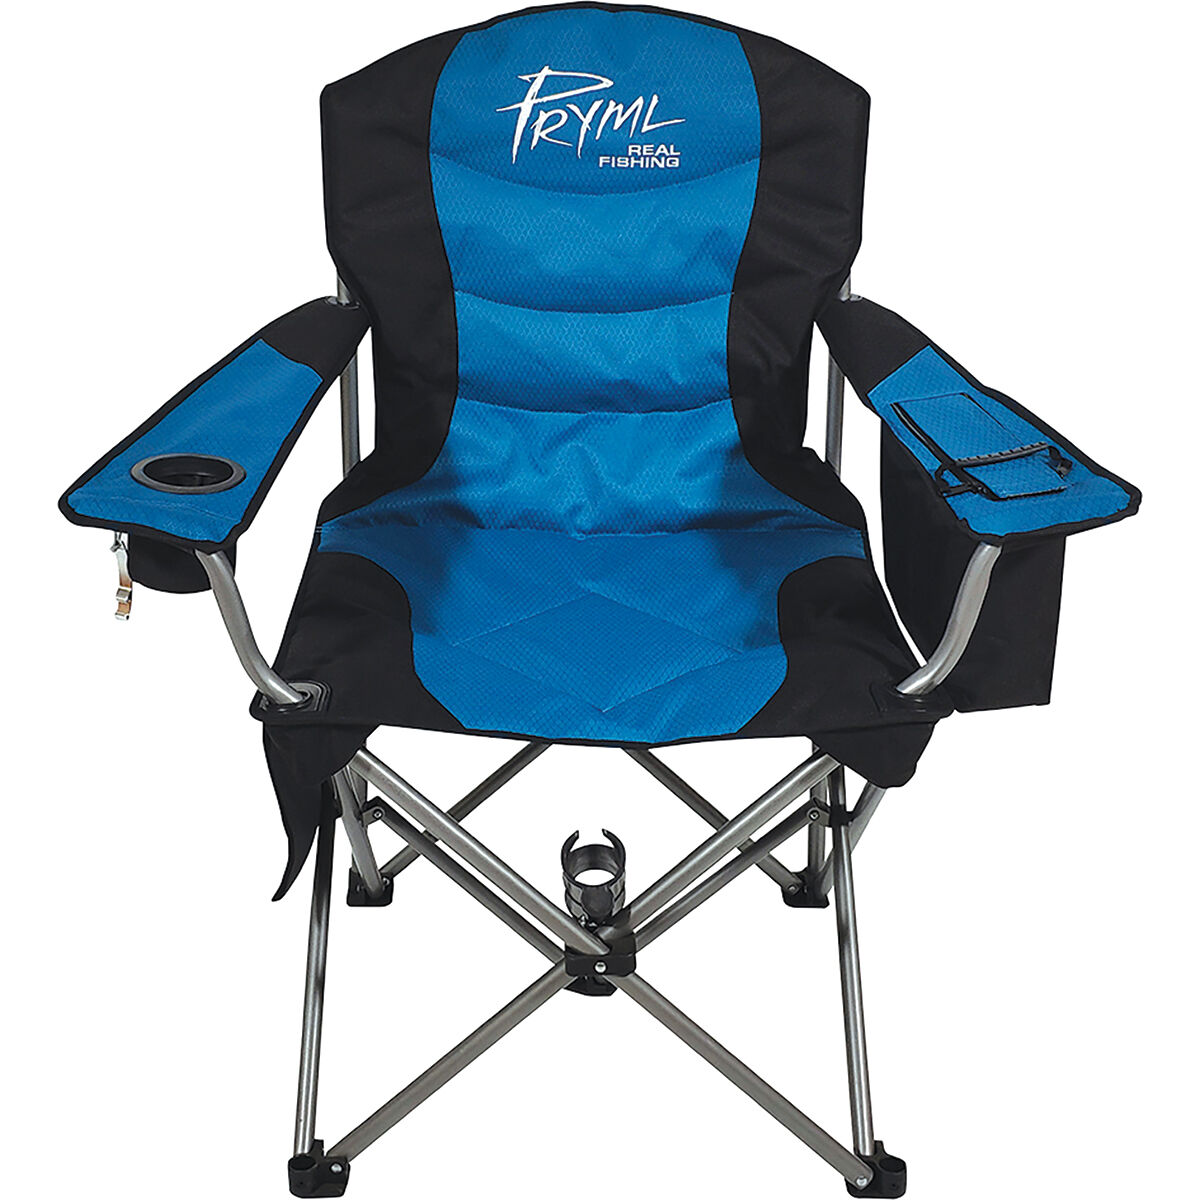 Fishing Chair Spares